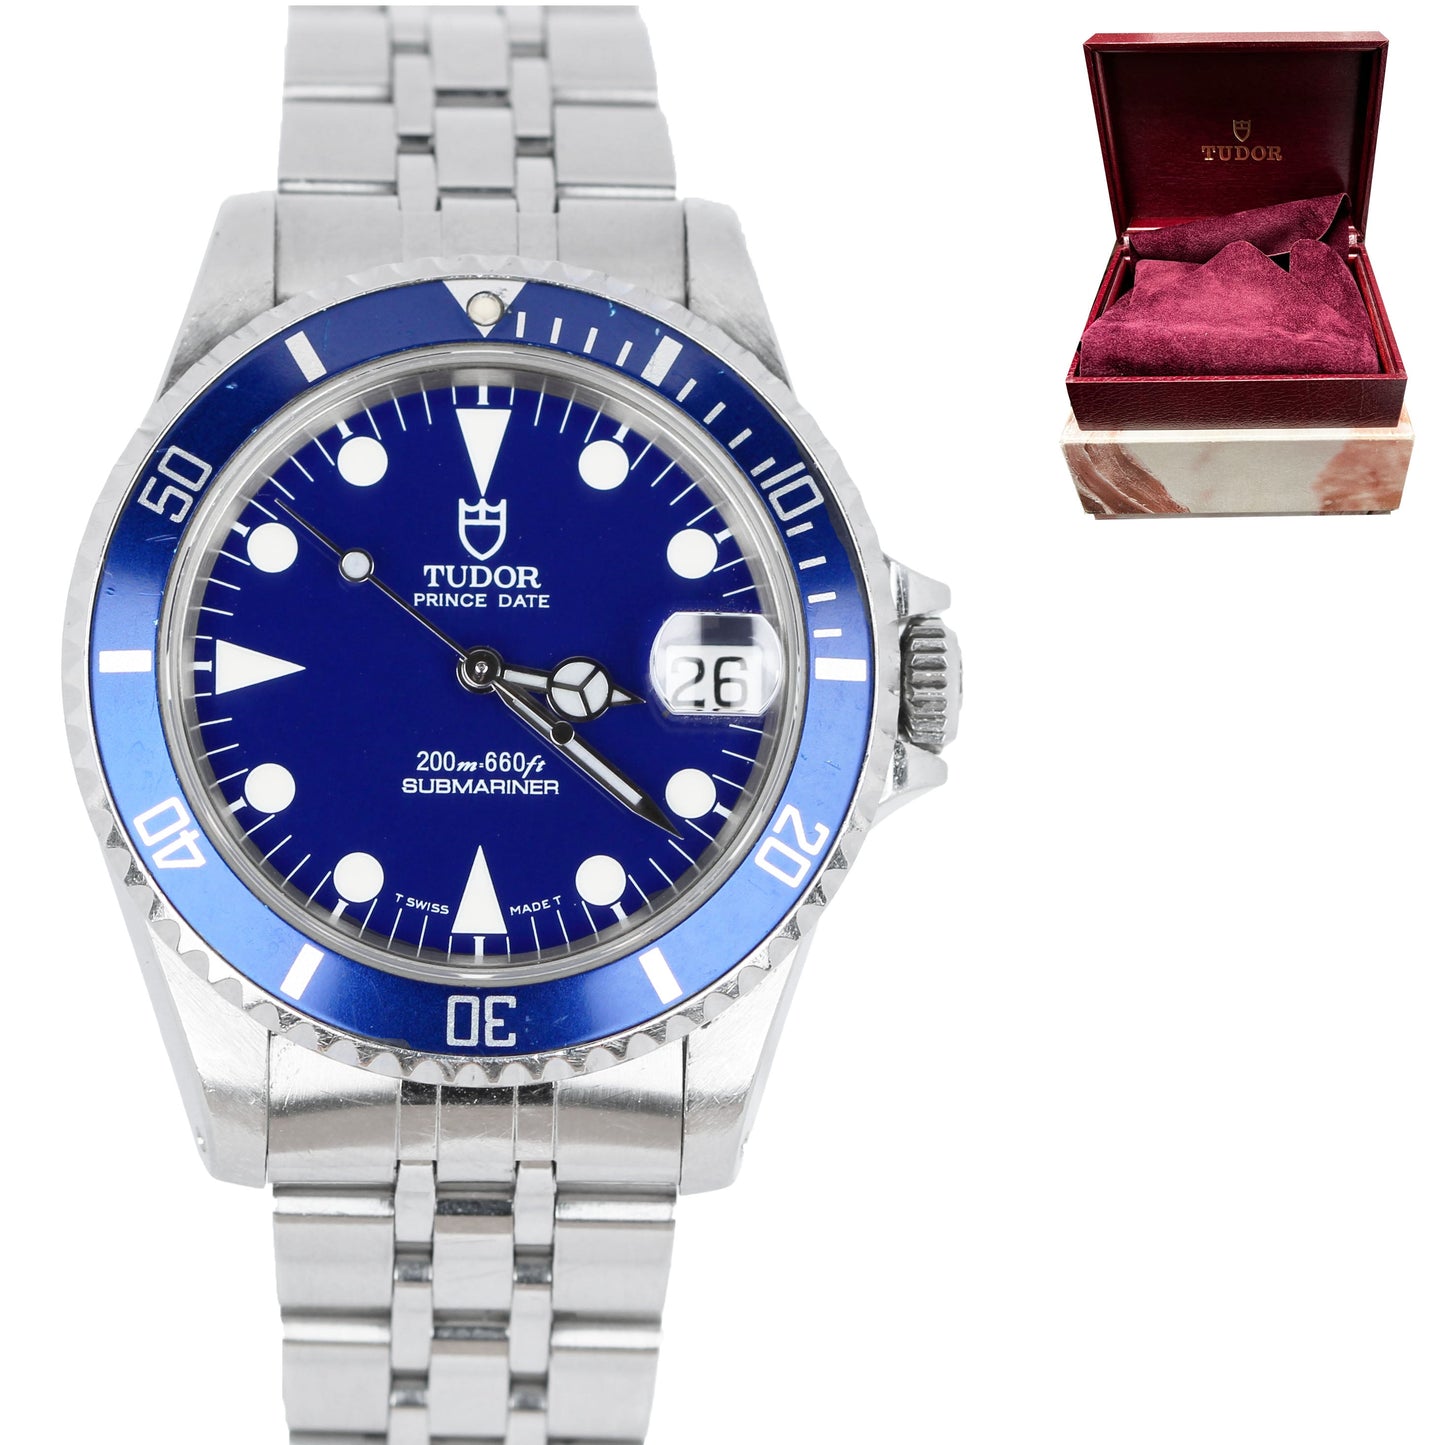 Vintage Tudor Submariner 75190 Prince Date Blue Matte Dial 36mm Automatic Watch